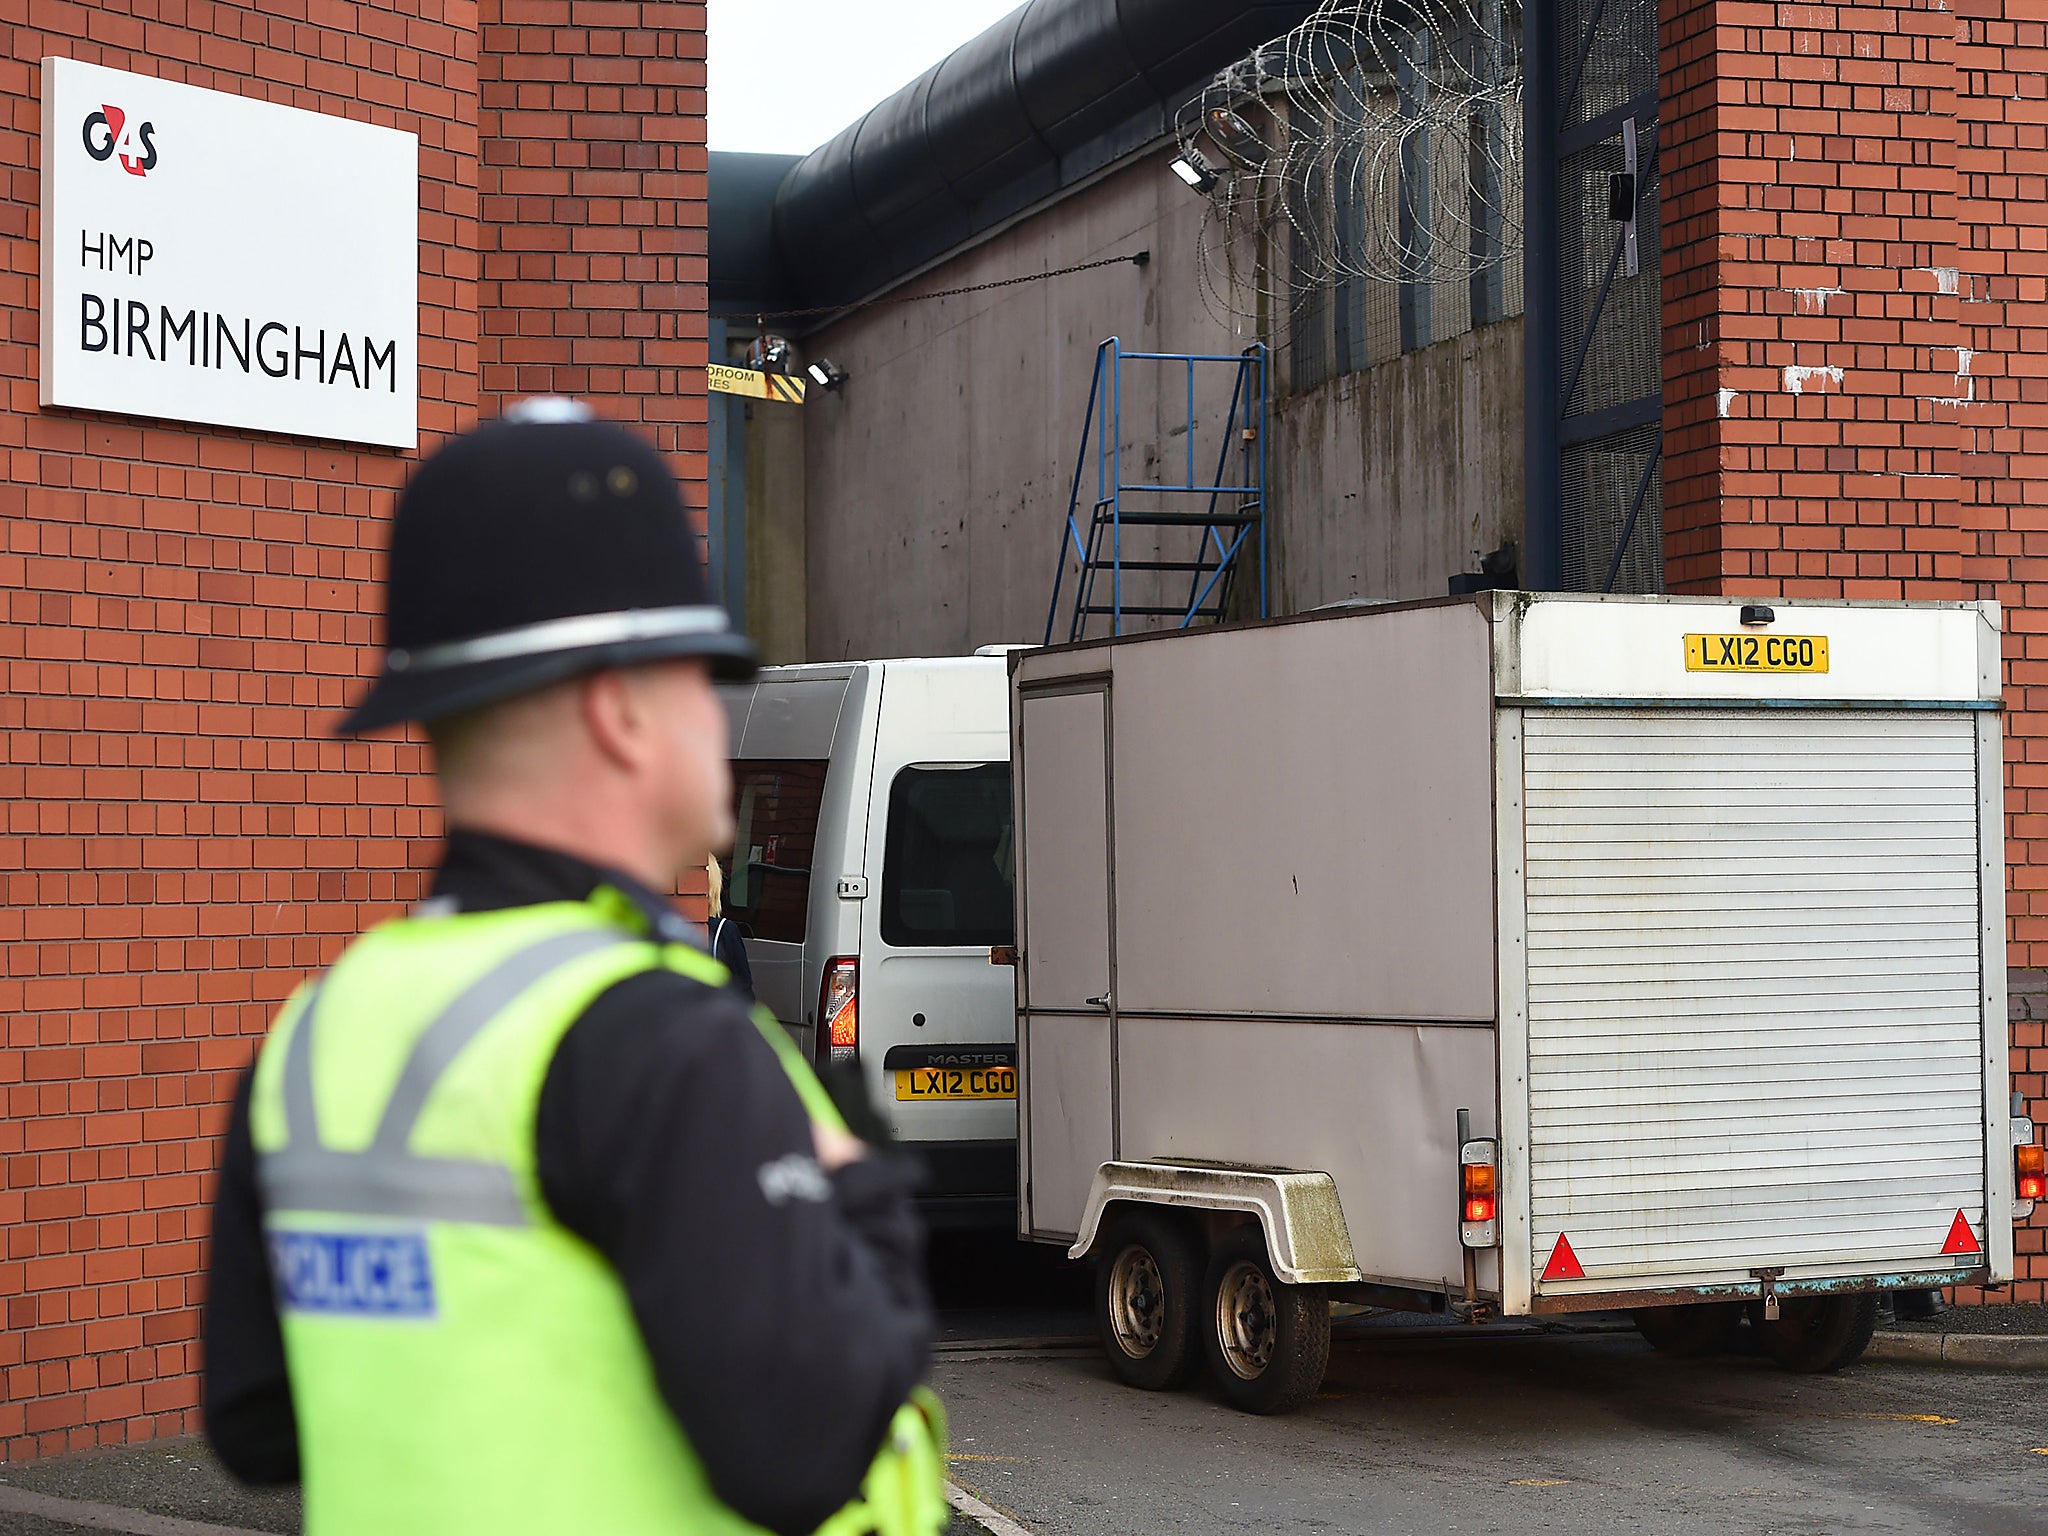 HMP Birmingham has been dogged by major problems for several years